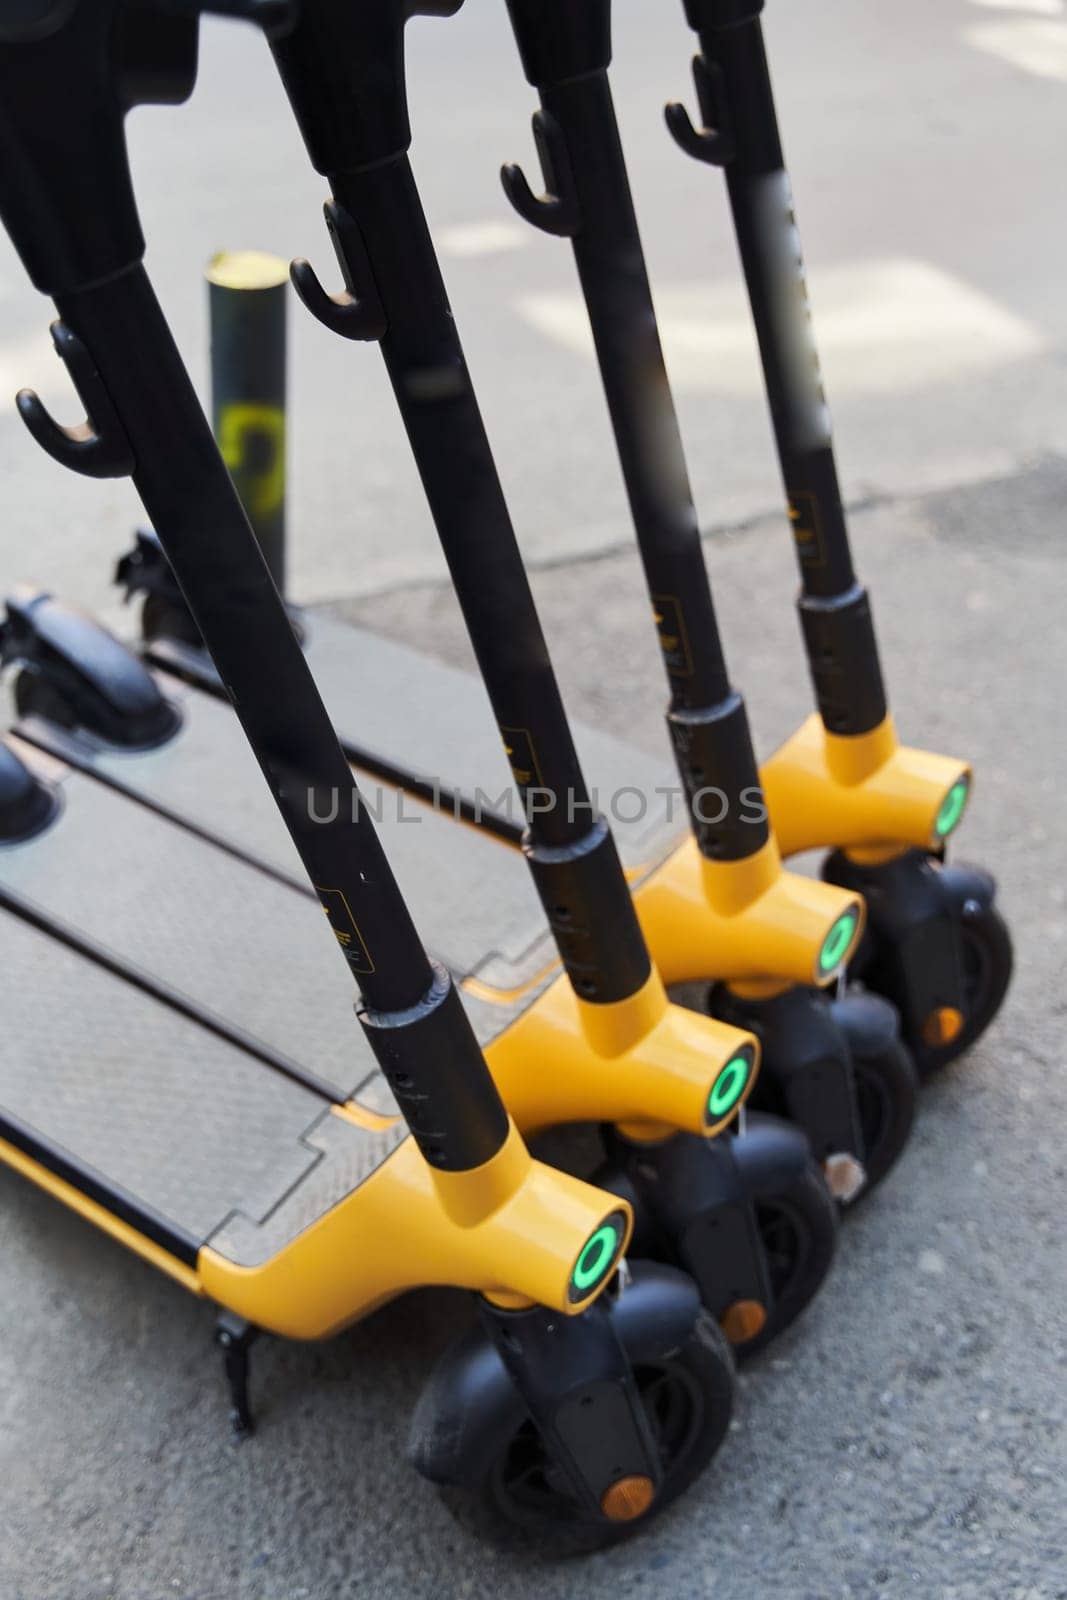 Electric scooters for rental . Vehicle rent service background. Electric kick scooters for transportation. High quality photo